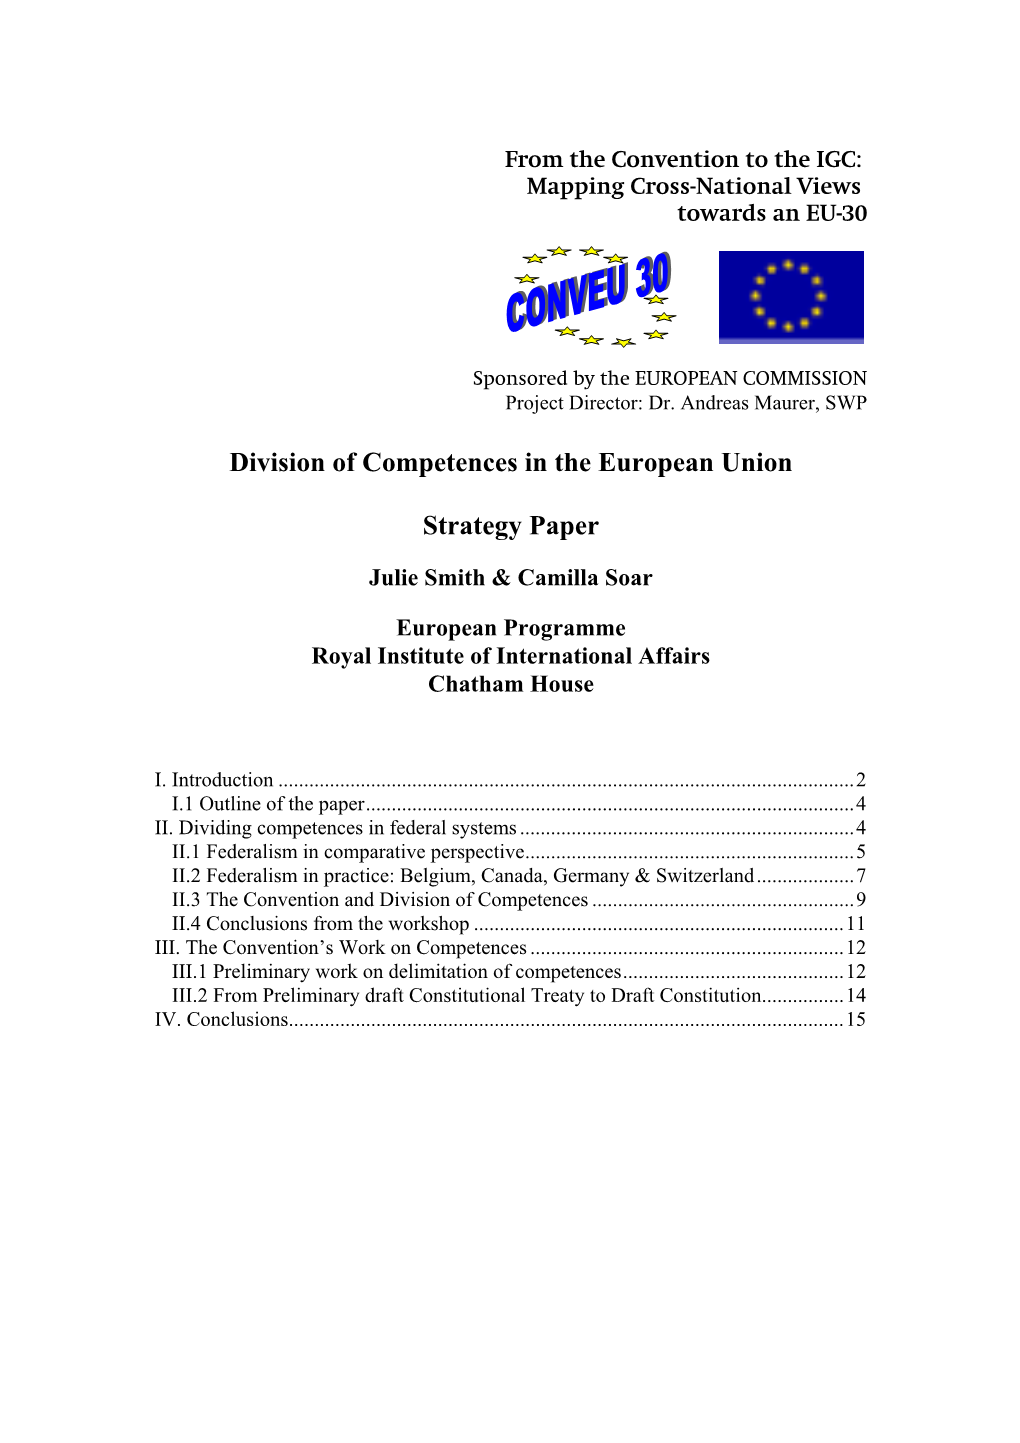 Division of Competences in the European Union